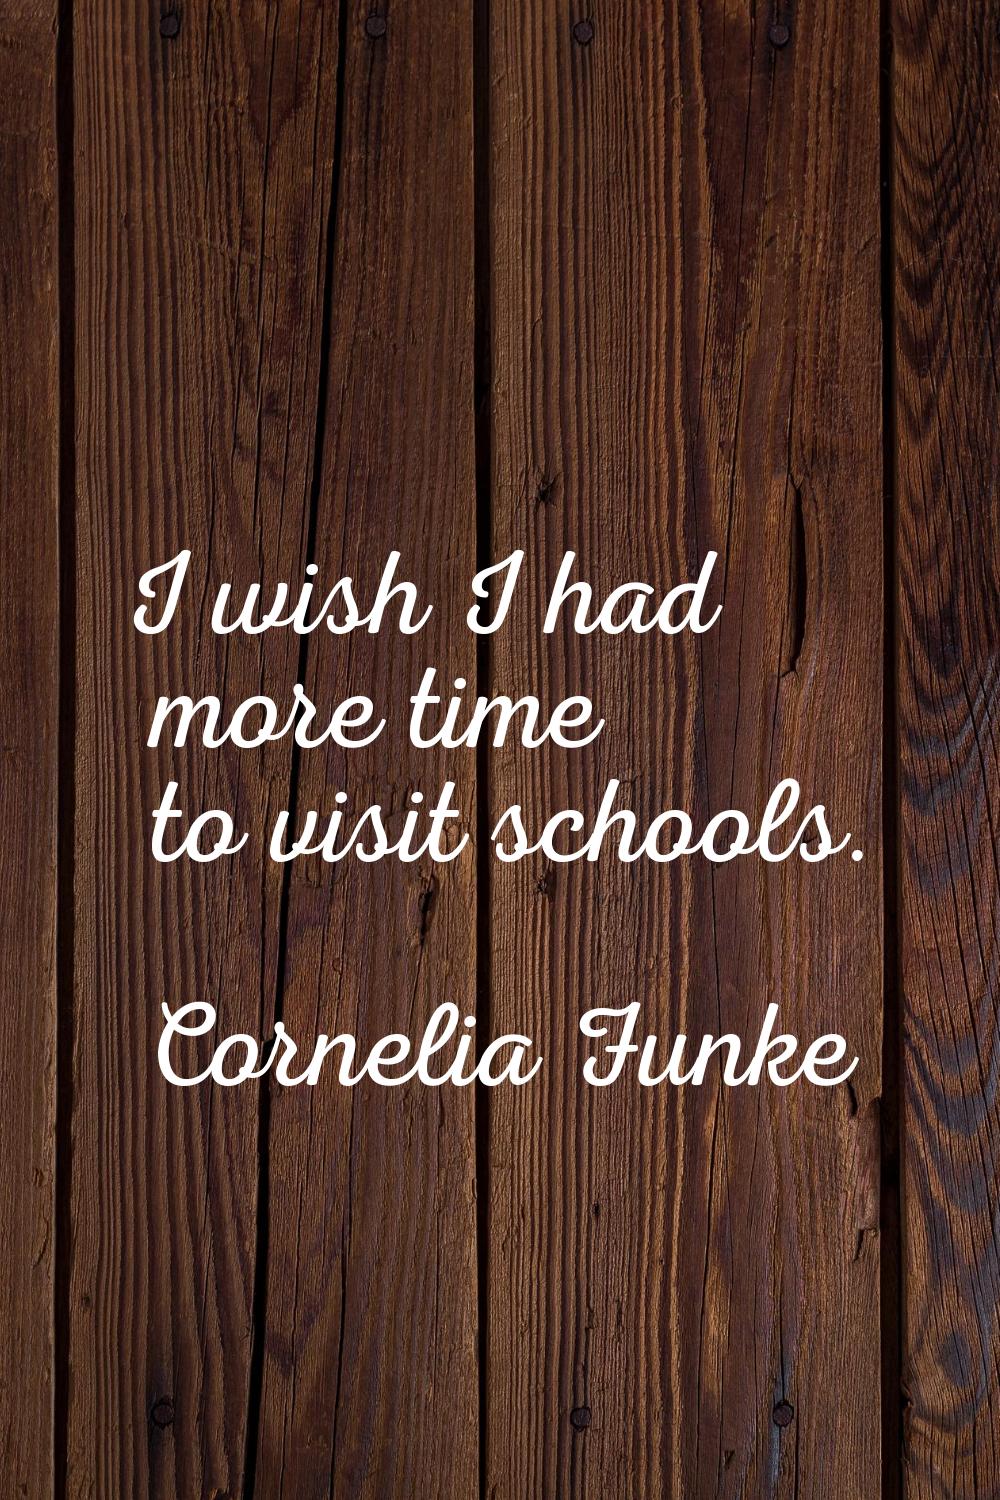 I wish I had more time to visit schools.